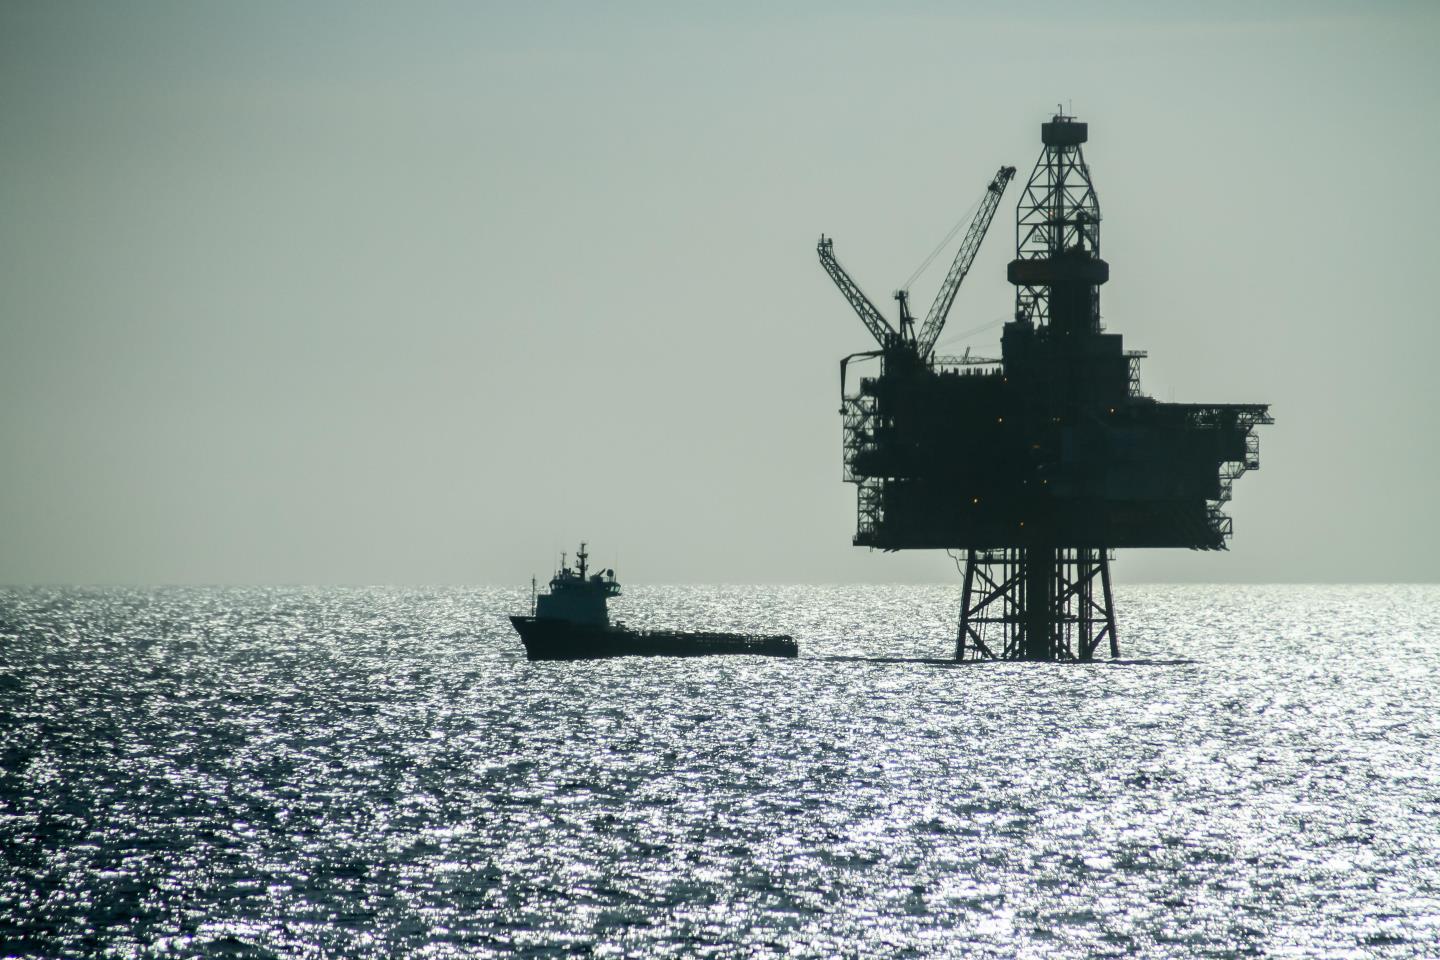 New investment bank Cavendish targets North Sea energy